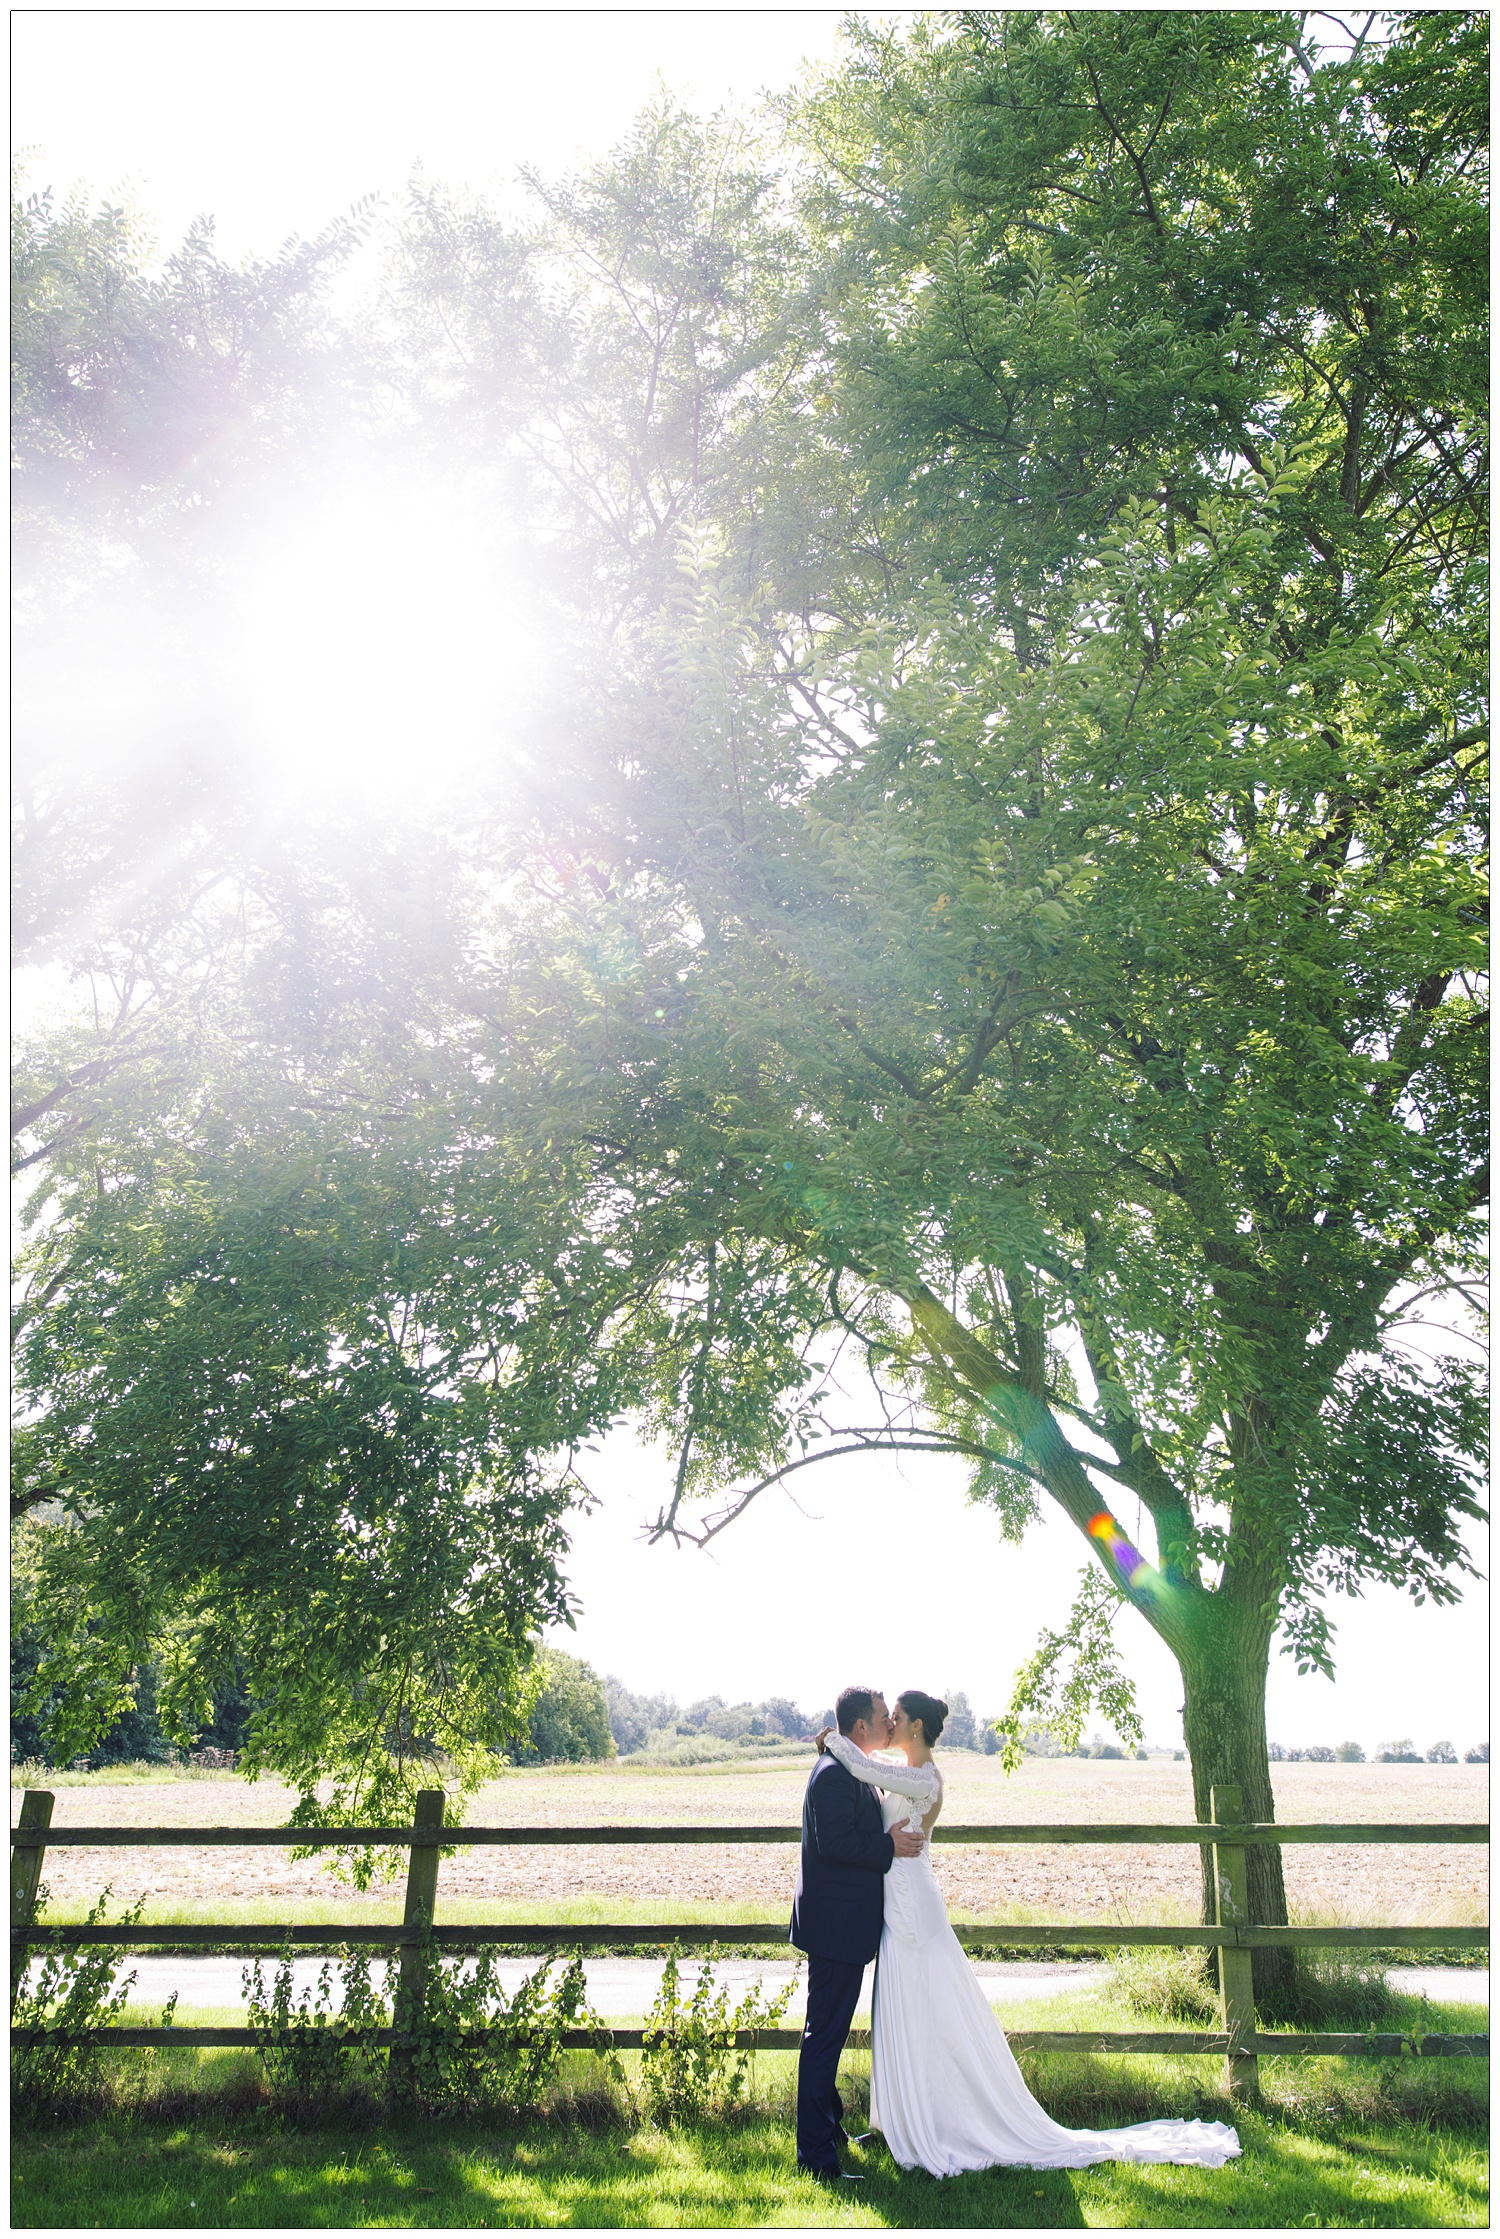 Under the canopy of a tree, through which the sun is flaring, a bride and groom kiss. They are in the grounds of Pledgdon Barn.